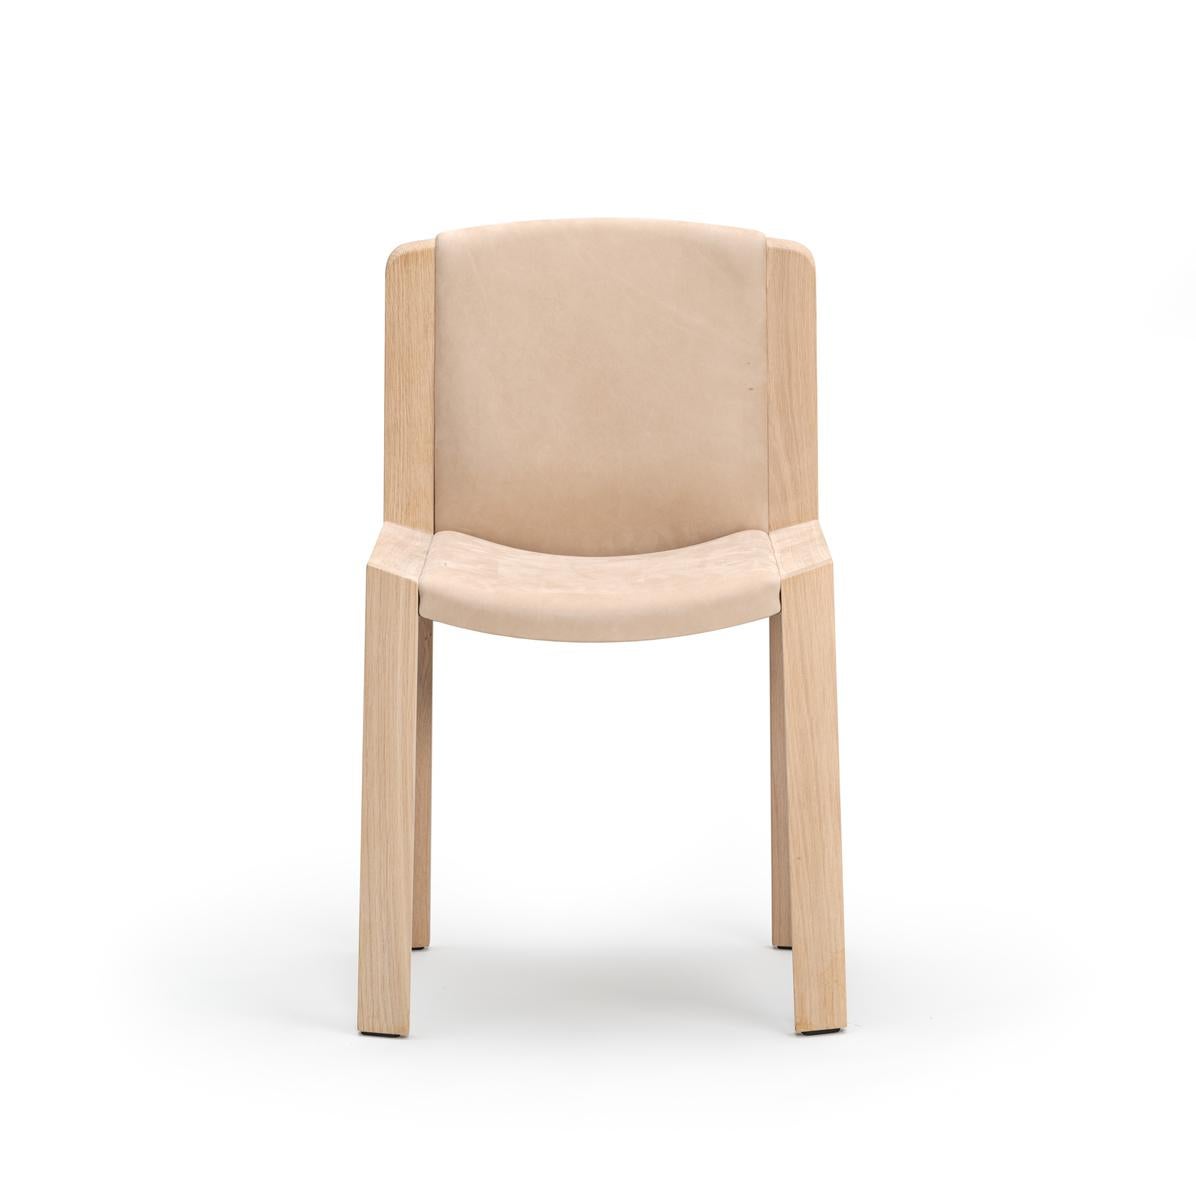 Joe Colombo 'Chair 300' Wood and Sørensen Leather Chair by Karakter For Sale 7